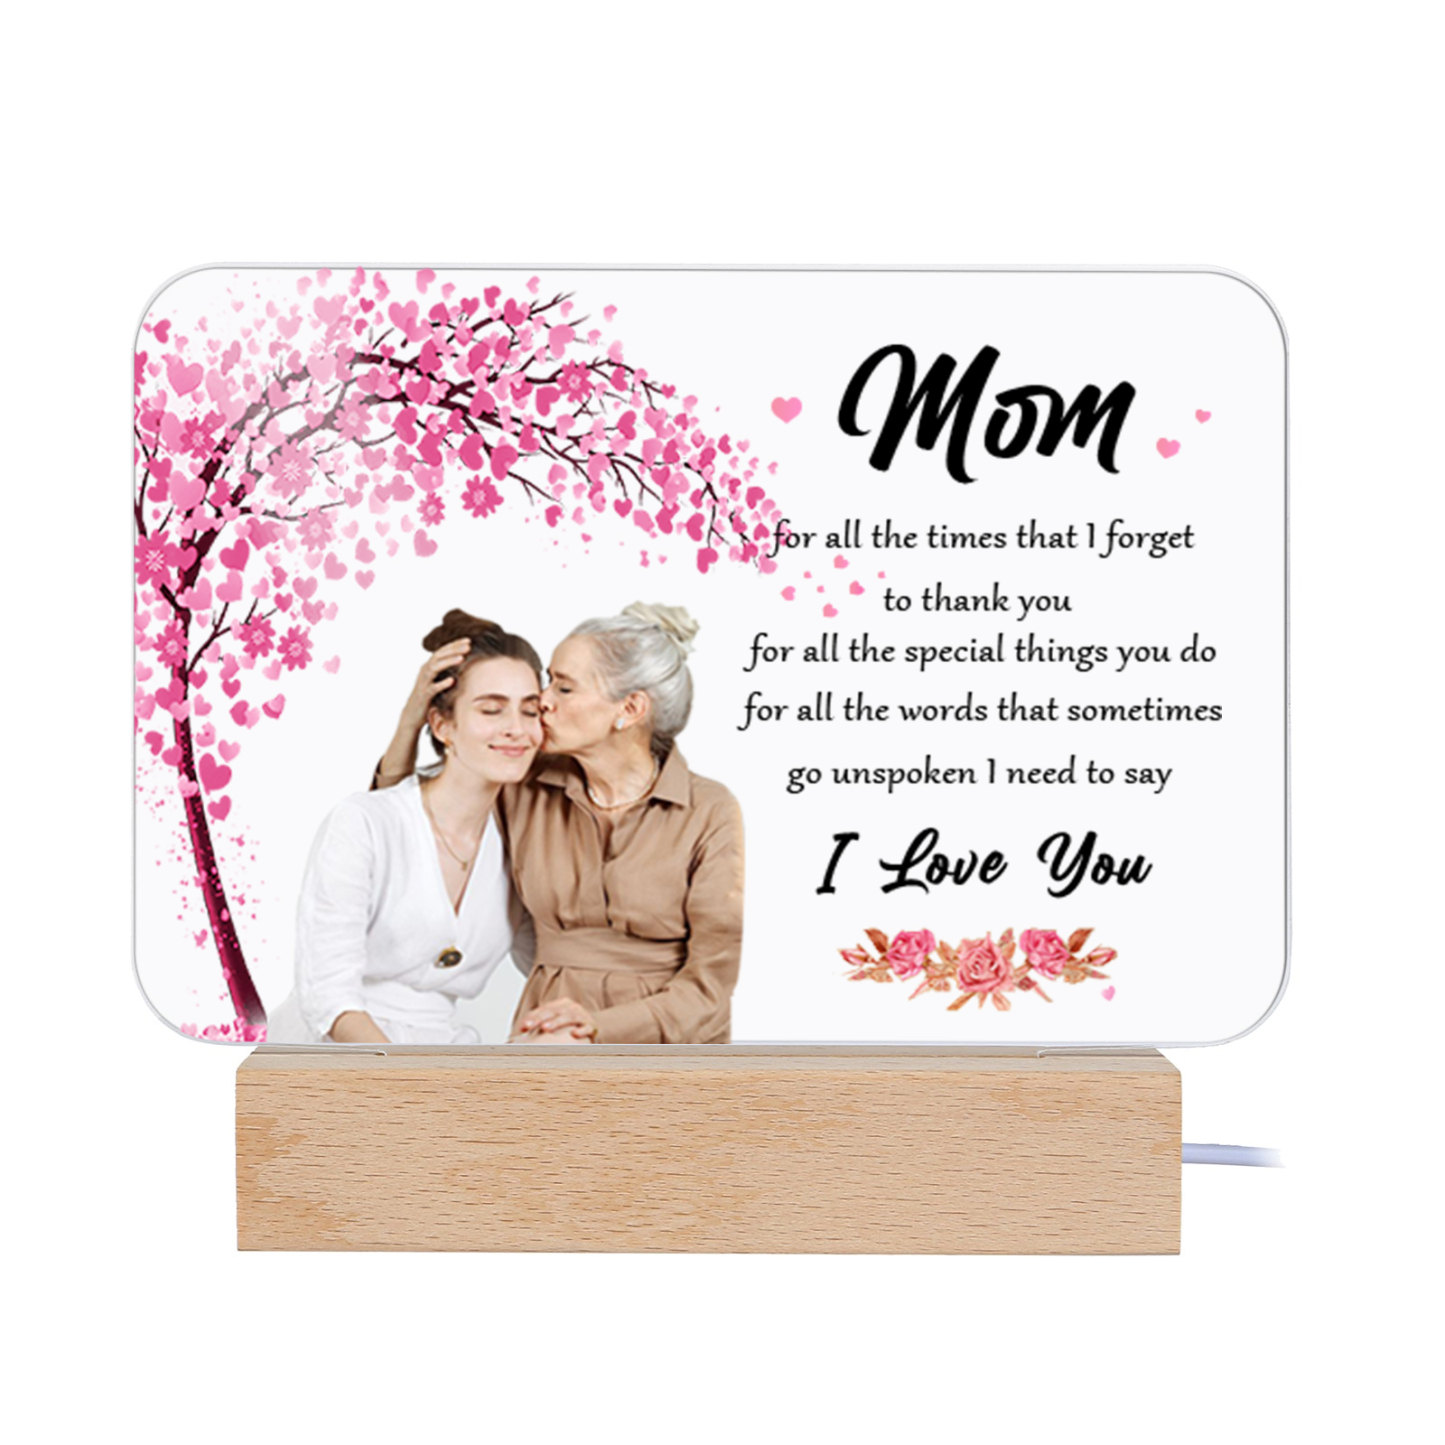 To My Mom-Love Flower Tree Night Light Photo Text Customized LED Bedroom Decoration for Mom